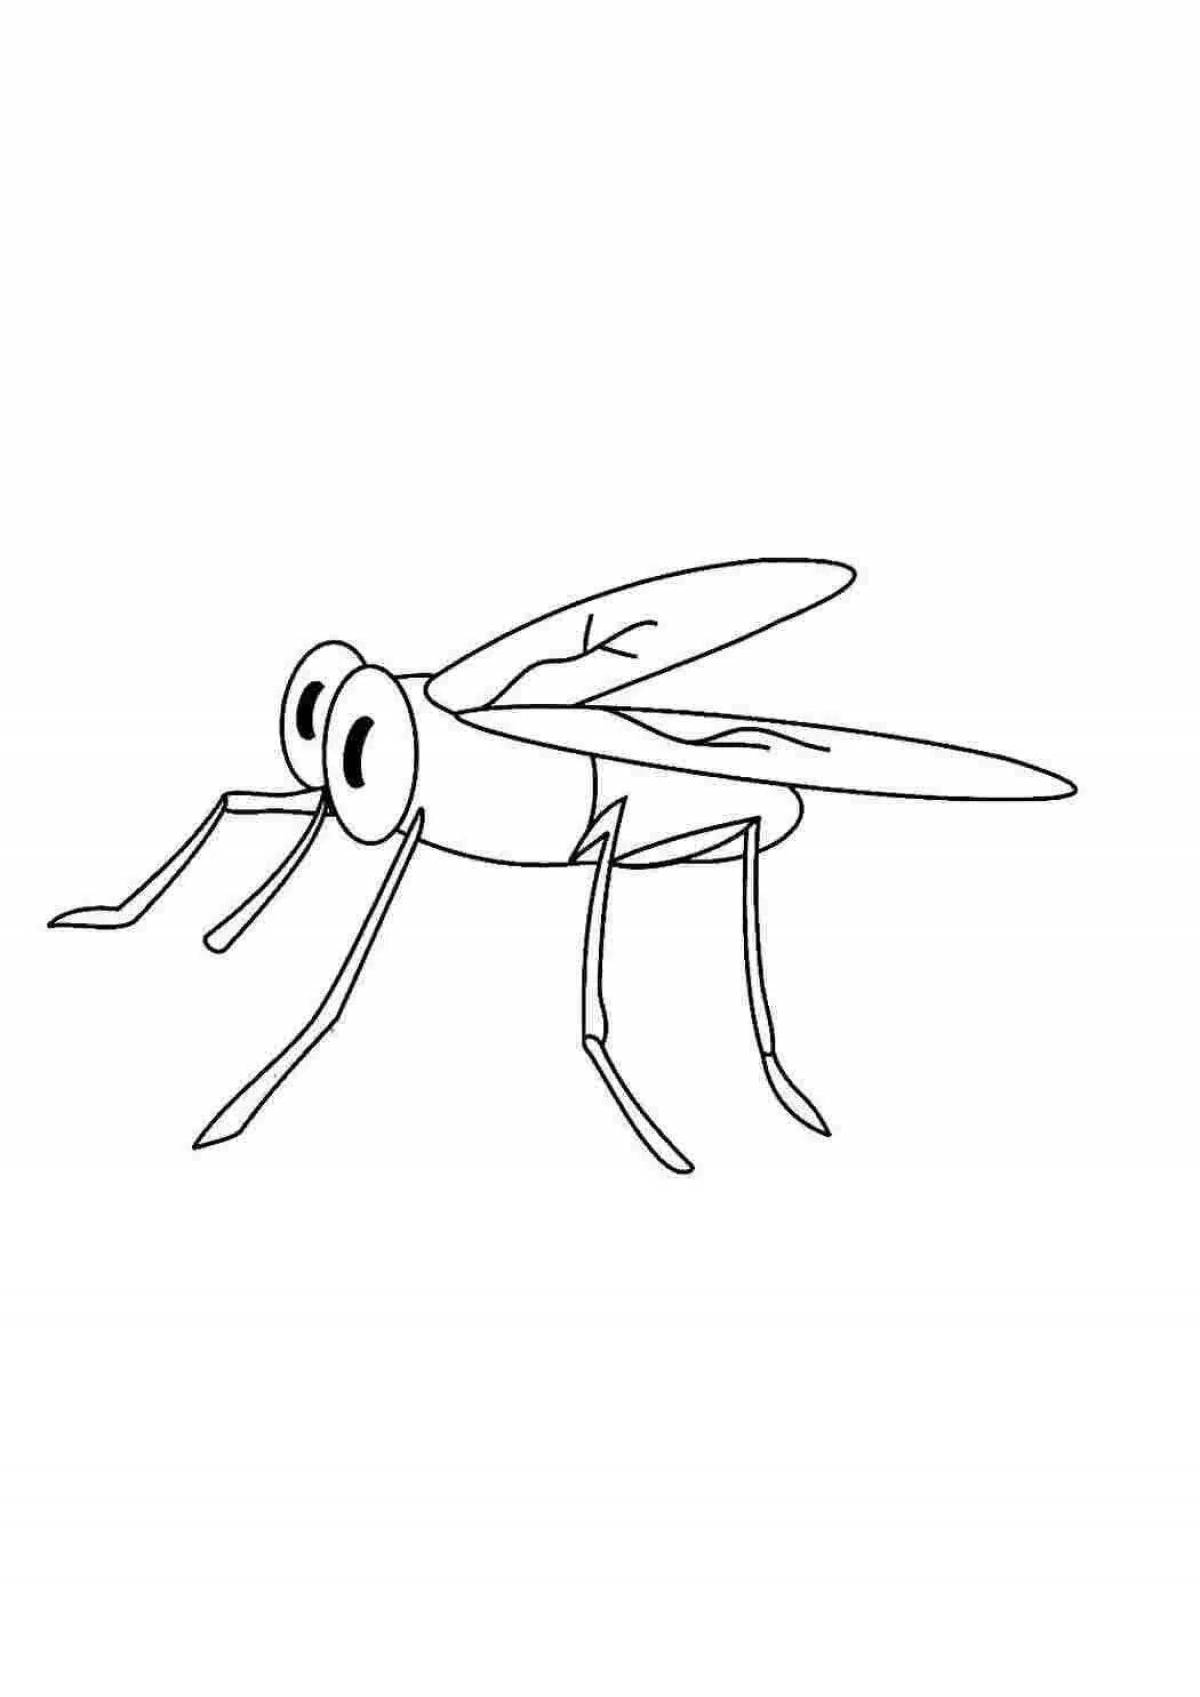 Adorable mosquito coloring page